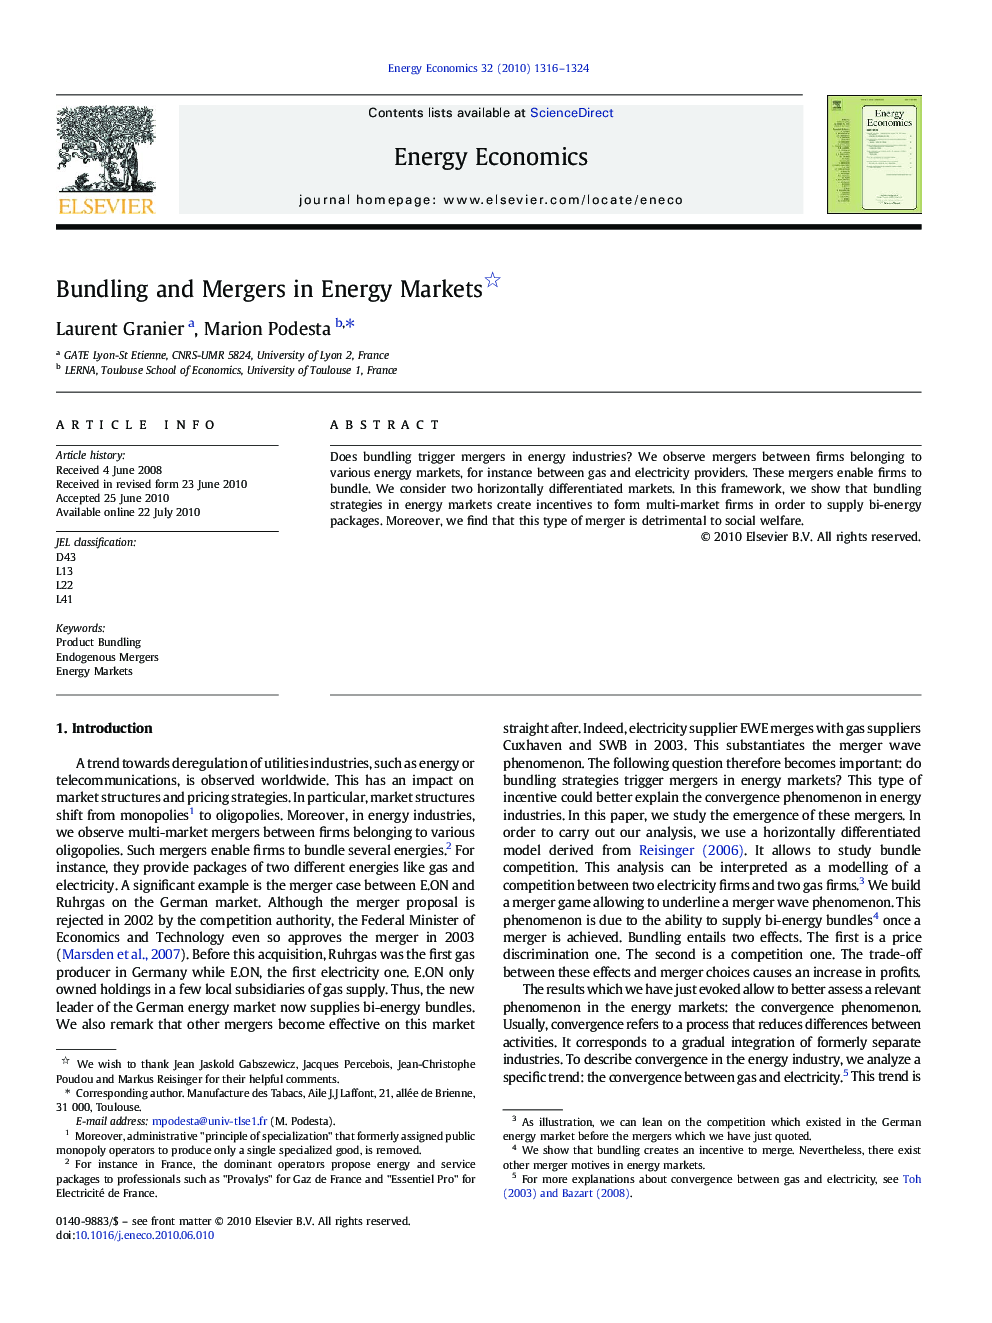 Bundling and Mergers in Energy Markets